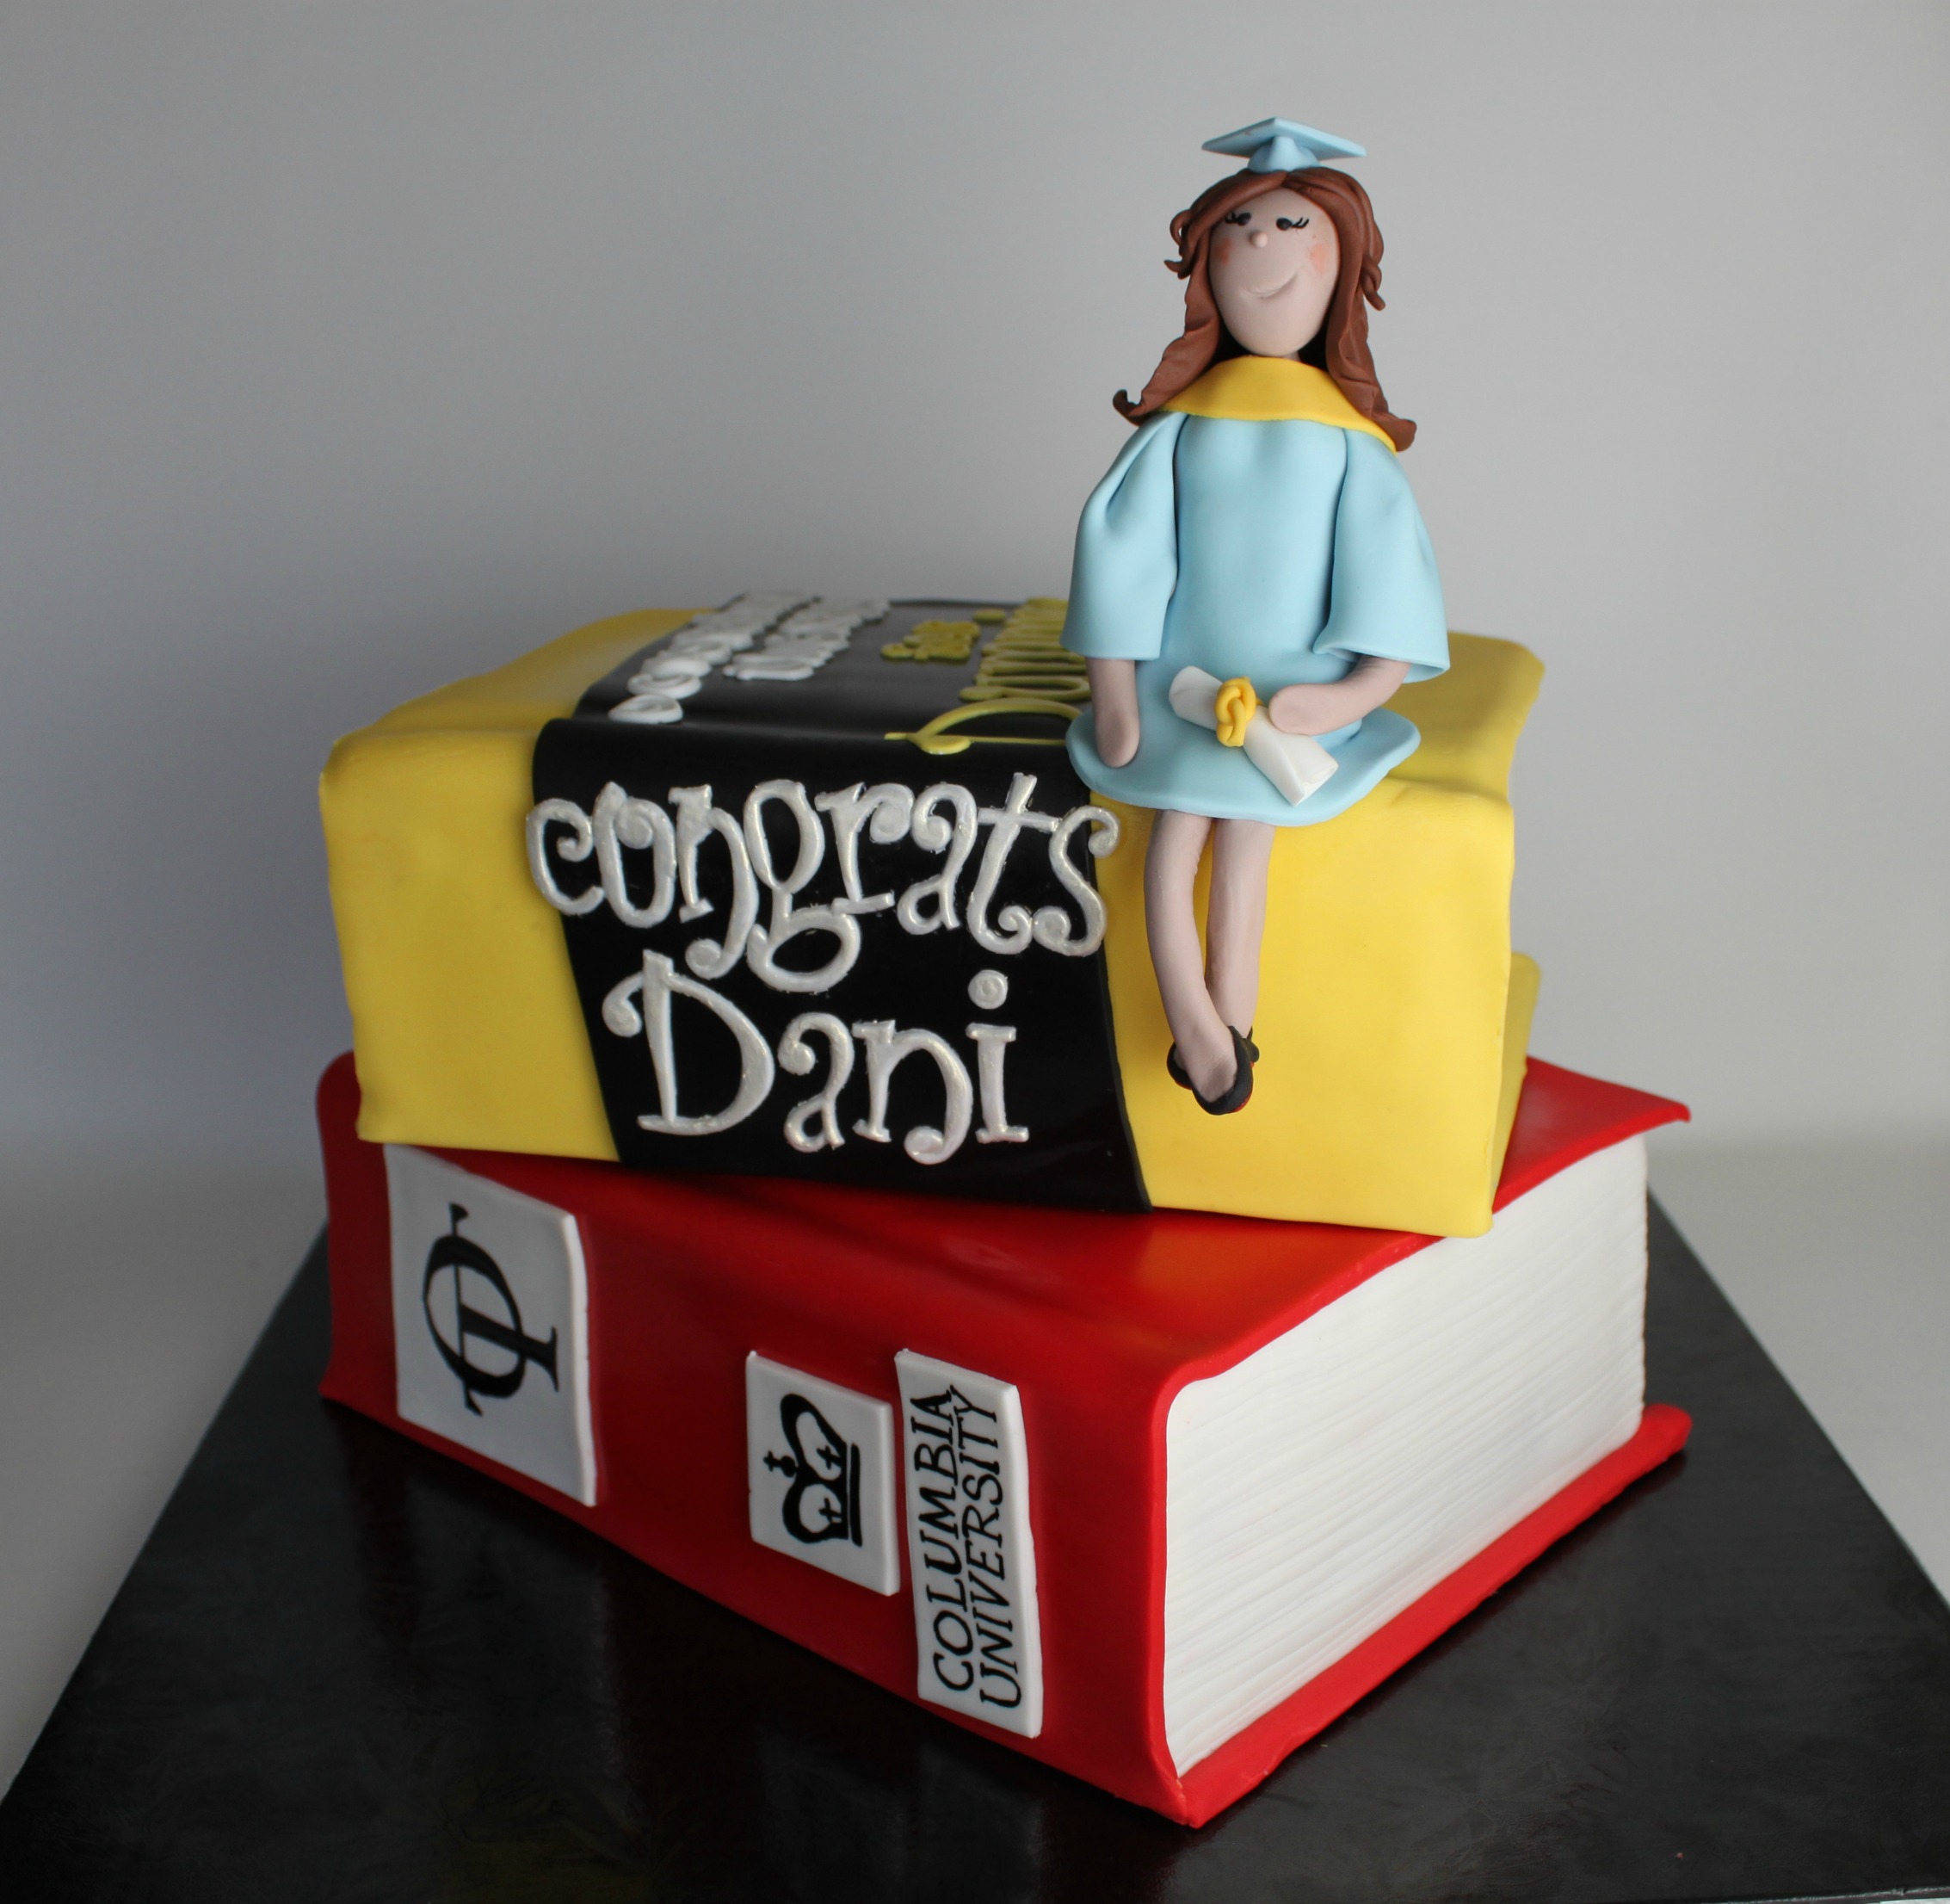 Served with love: Story Book Cake